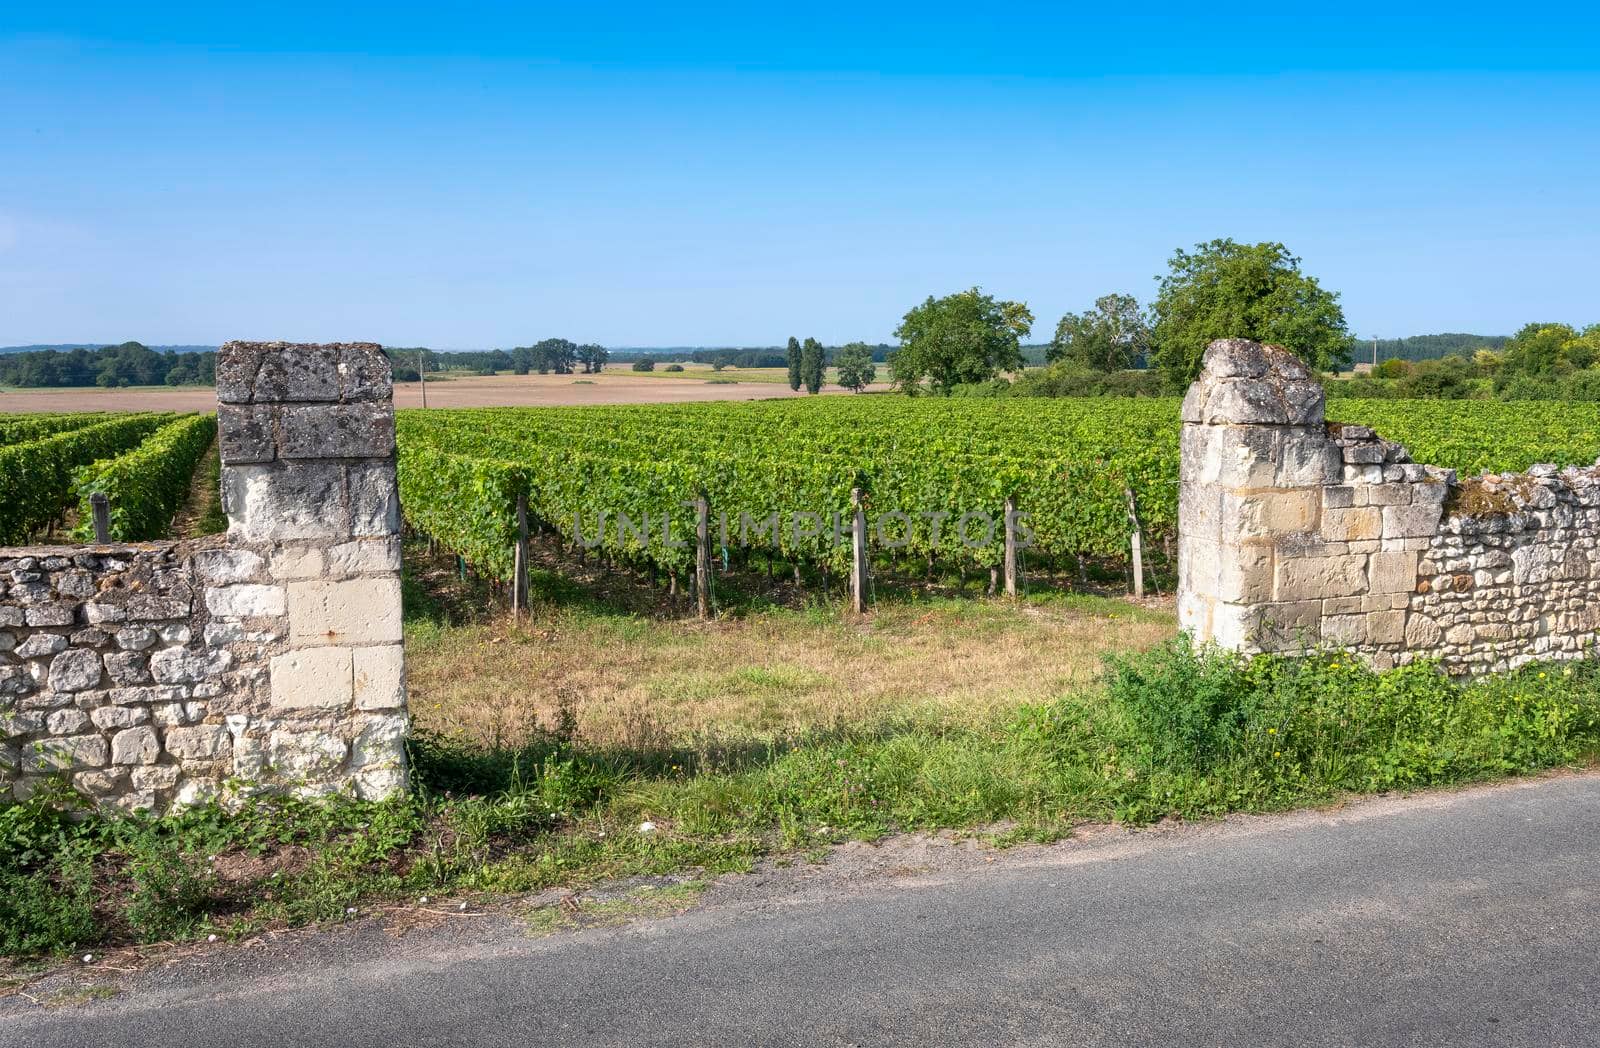 vineyards and old stone walls in Parc naturel regional Loire Anjou Touraine near river loire in france by ahavelaar